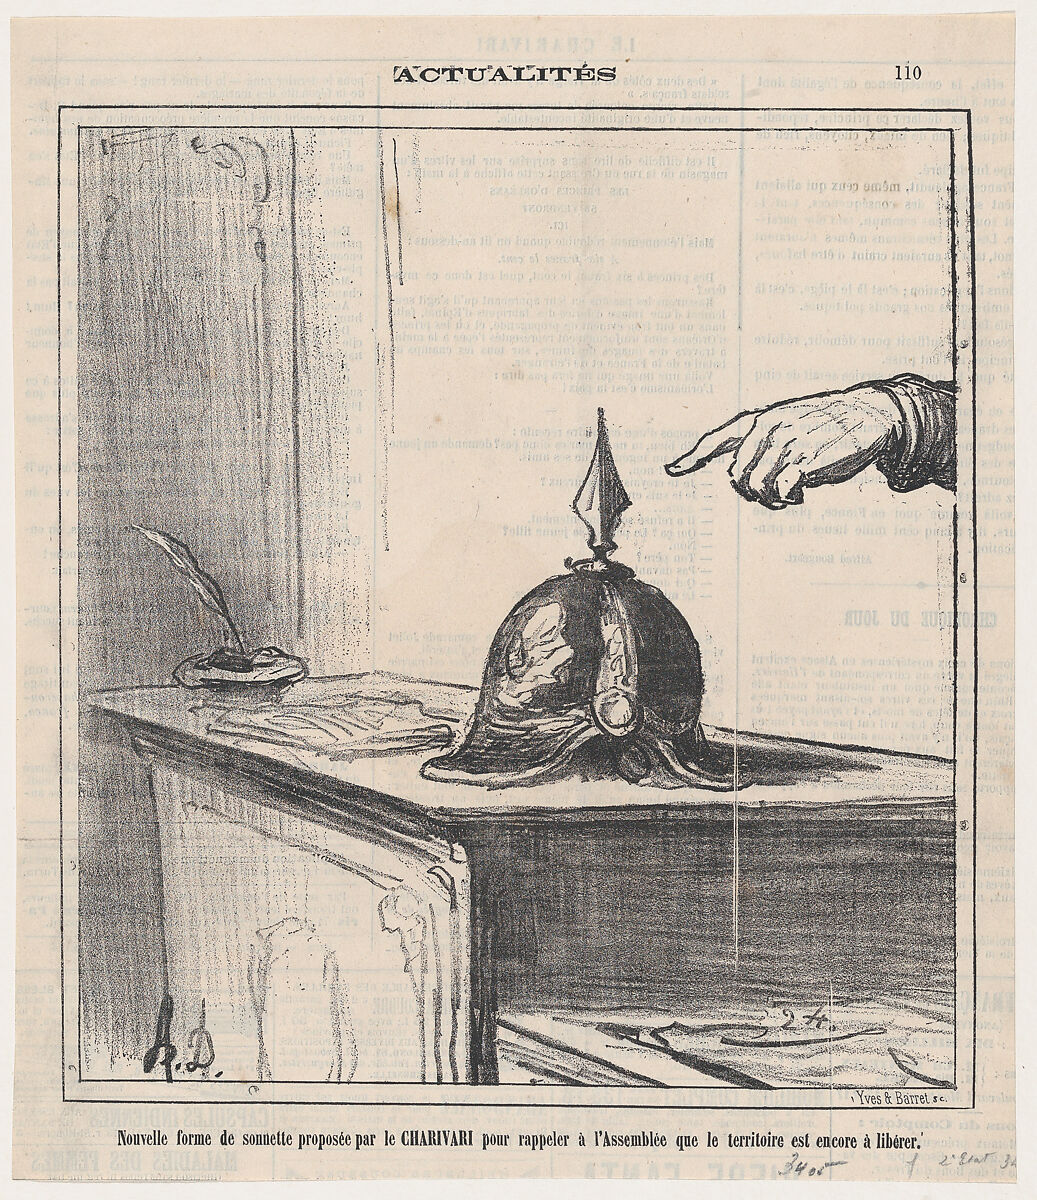 The Charivari is proposing a new kind of bell which should remind the Assembly that some of the territories still need to be liberated, from 'News of the day,' published in "Le Charivari", Honoré Daumier (French, Marseilles 1808–1879 Valmondois), Lithograph on newsprint; second state of two (Delteil) 